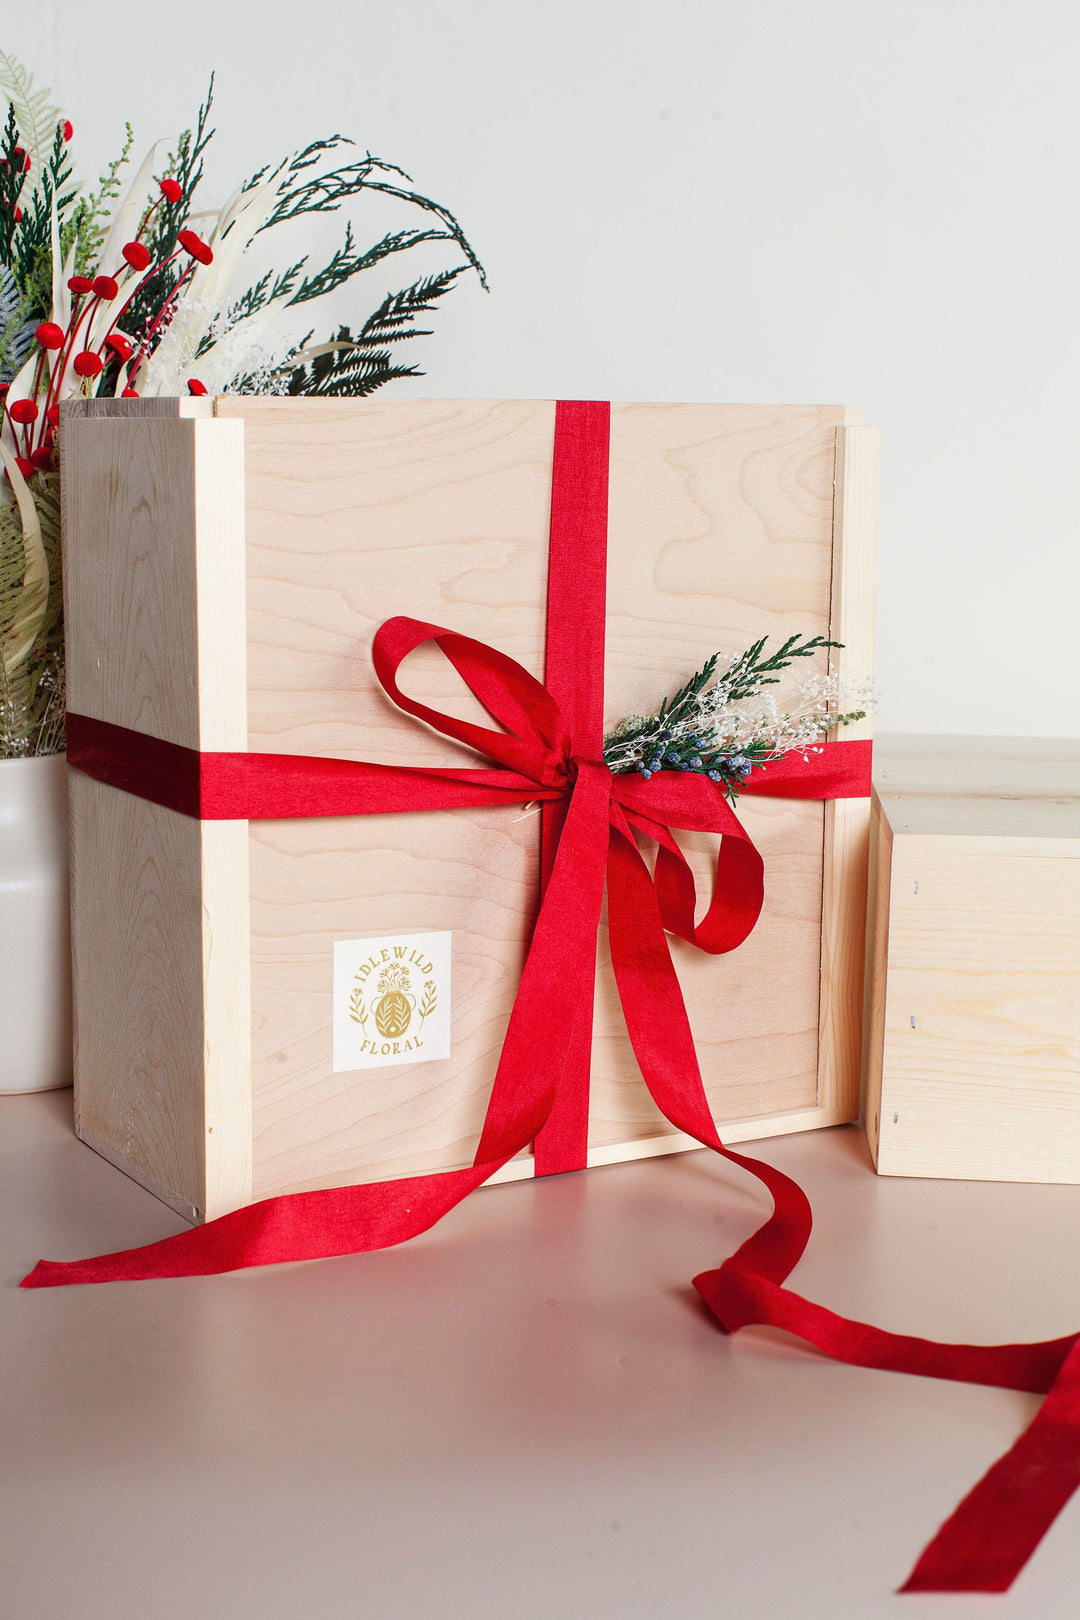 Idlewild Floral Co. Gift Giving Noel Gift Box